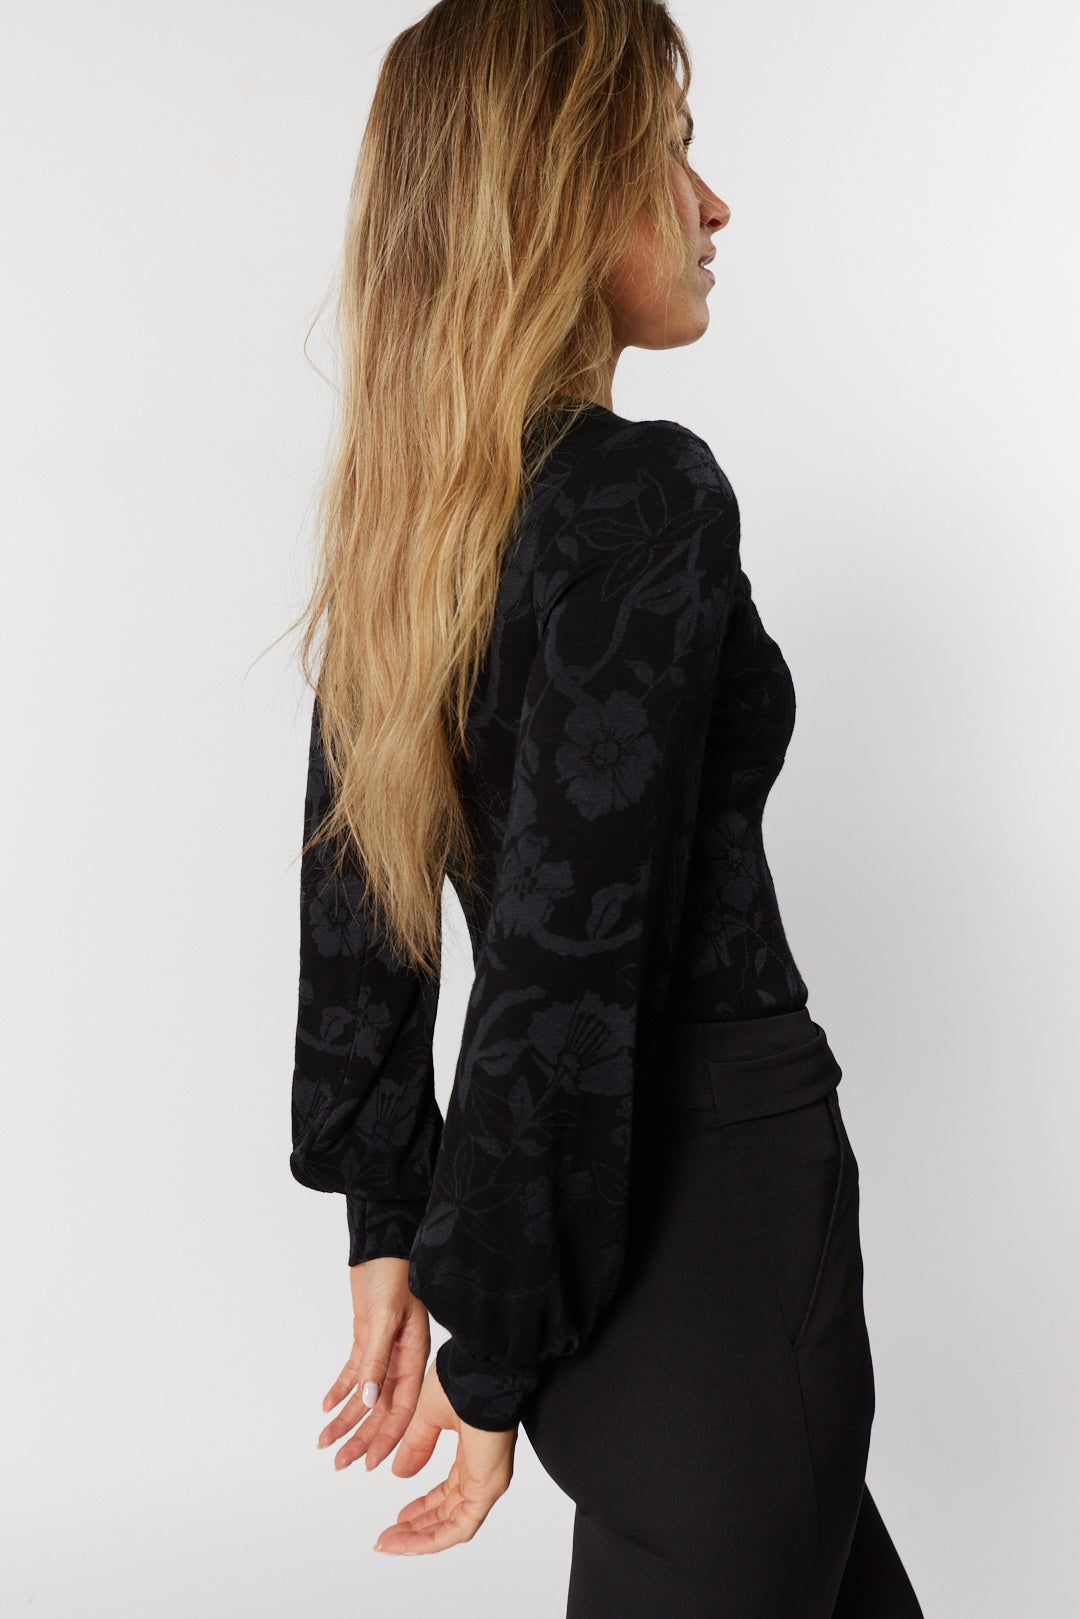 Black corset sweater with floral patterns | Sandy